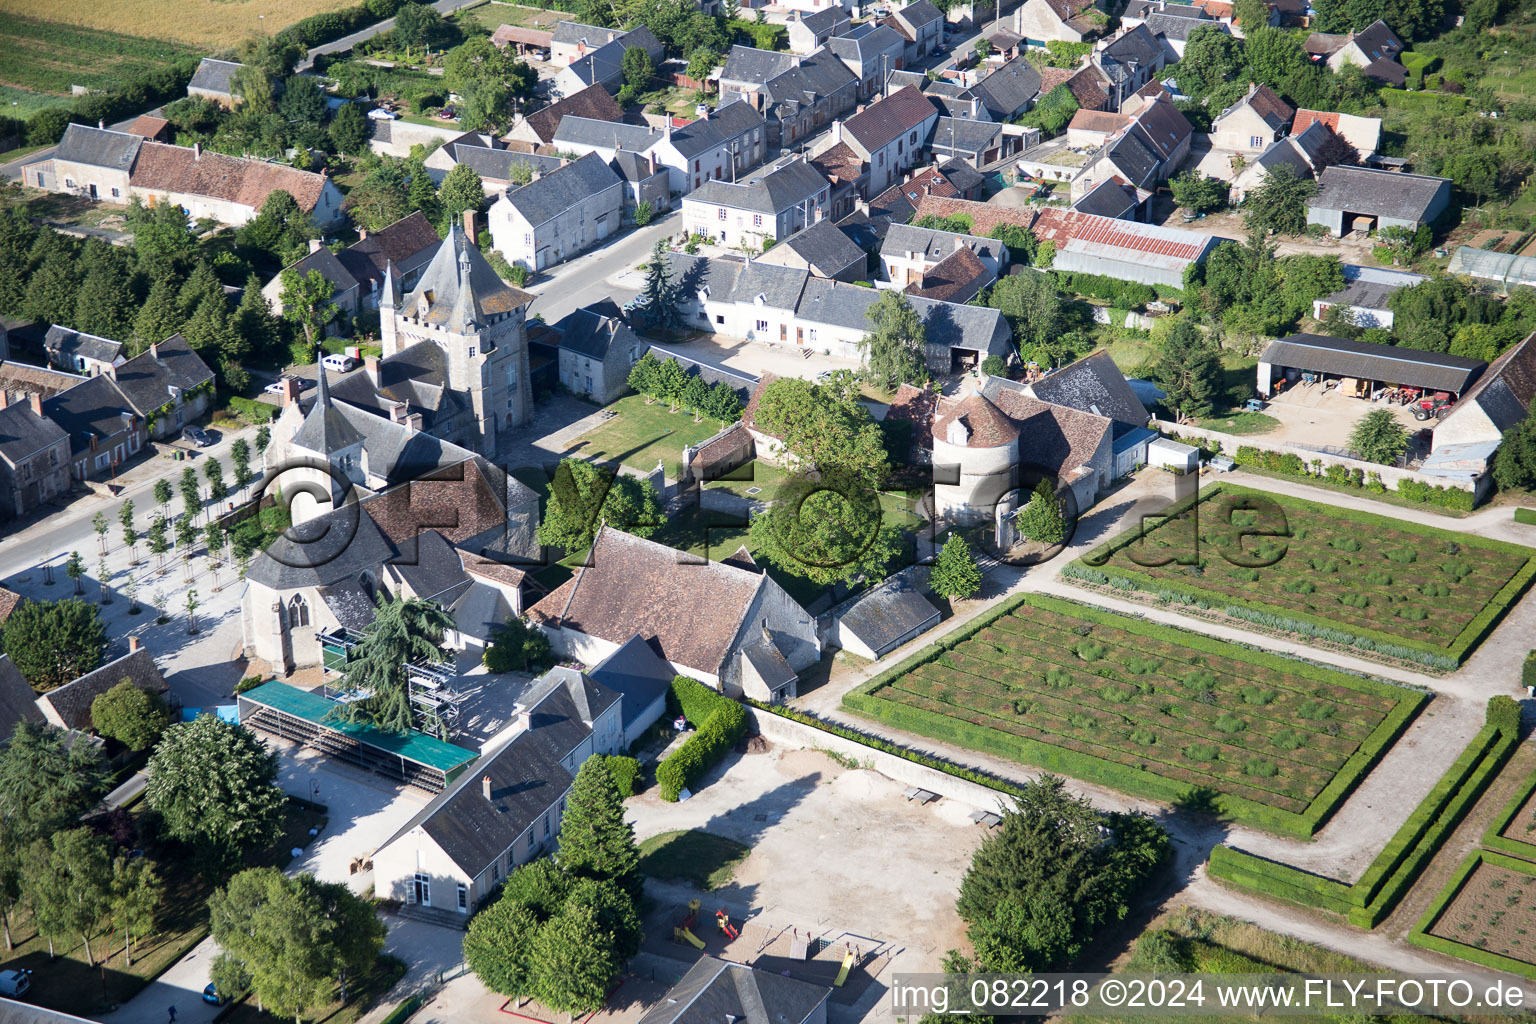 Talcy in the state Loir et Cher, France seen from above